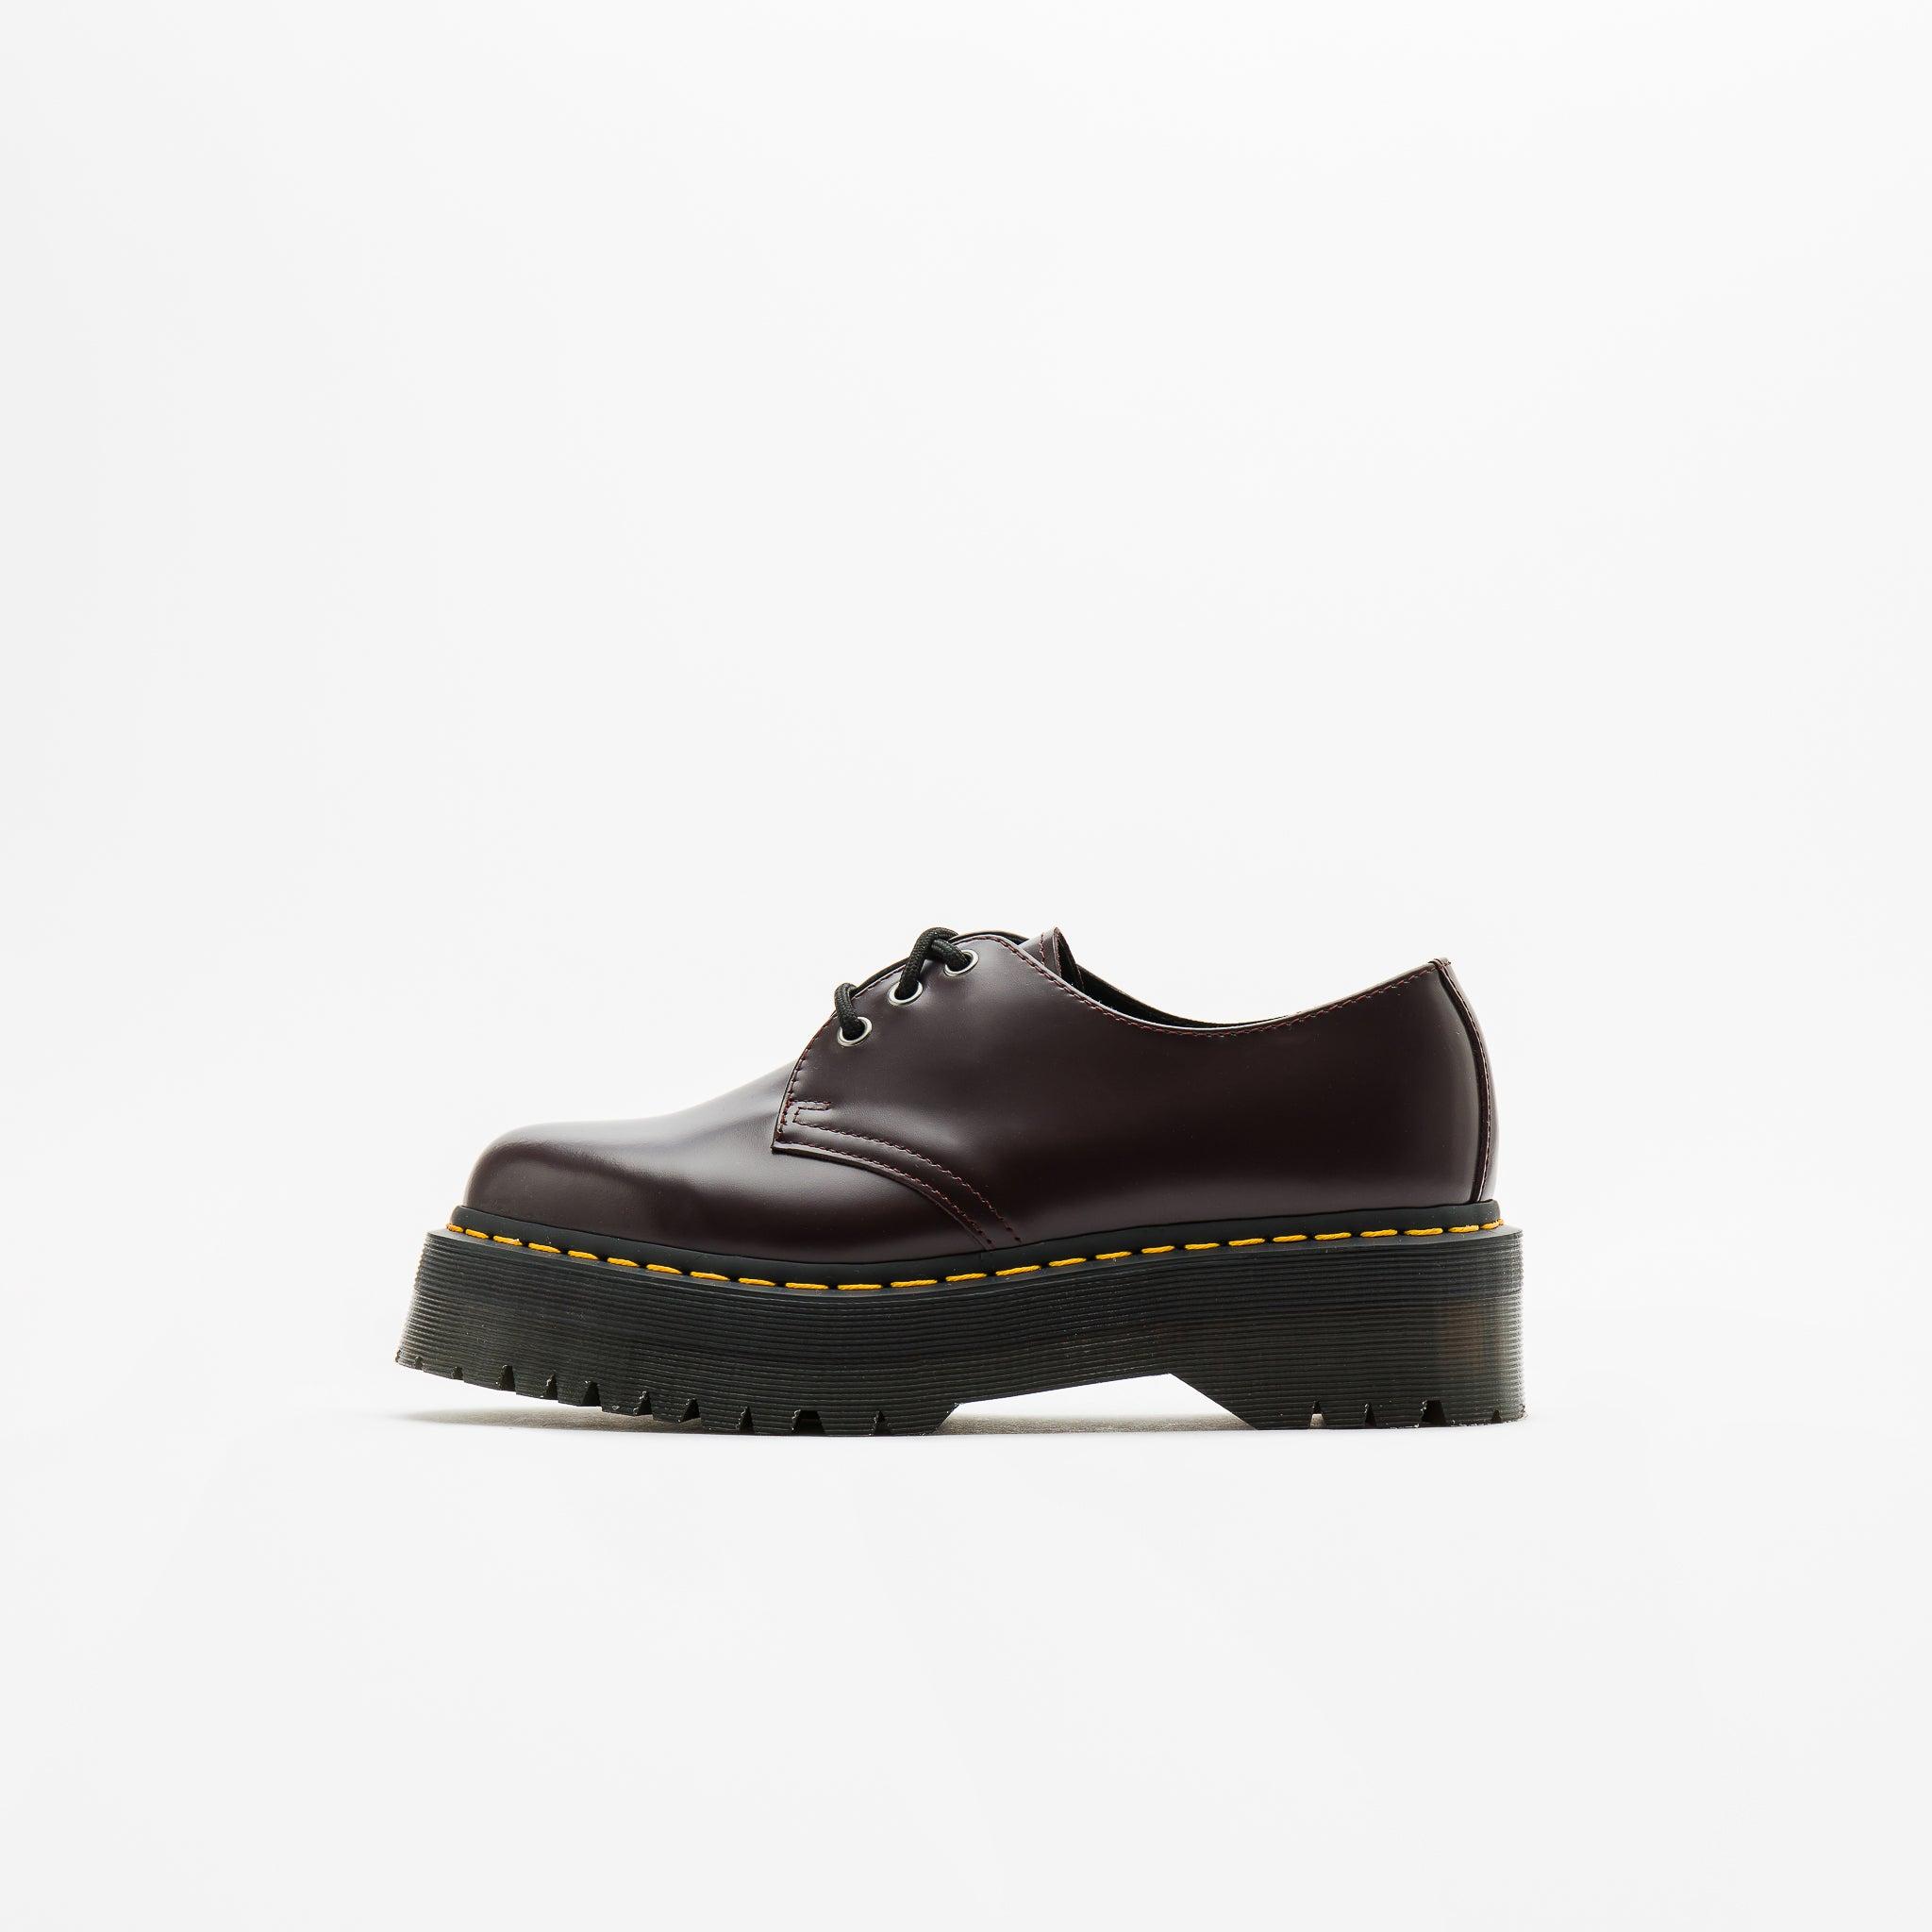 Dr. Martens 1461 Smooth Leather Quad Derby in Black | Lyst